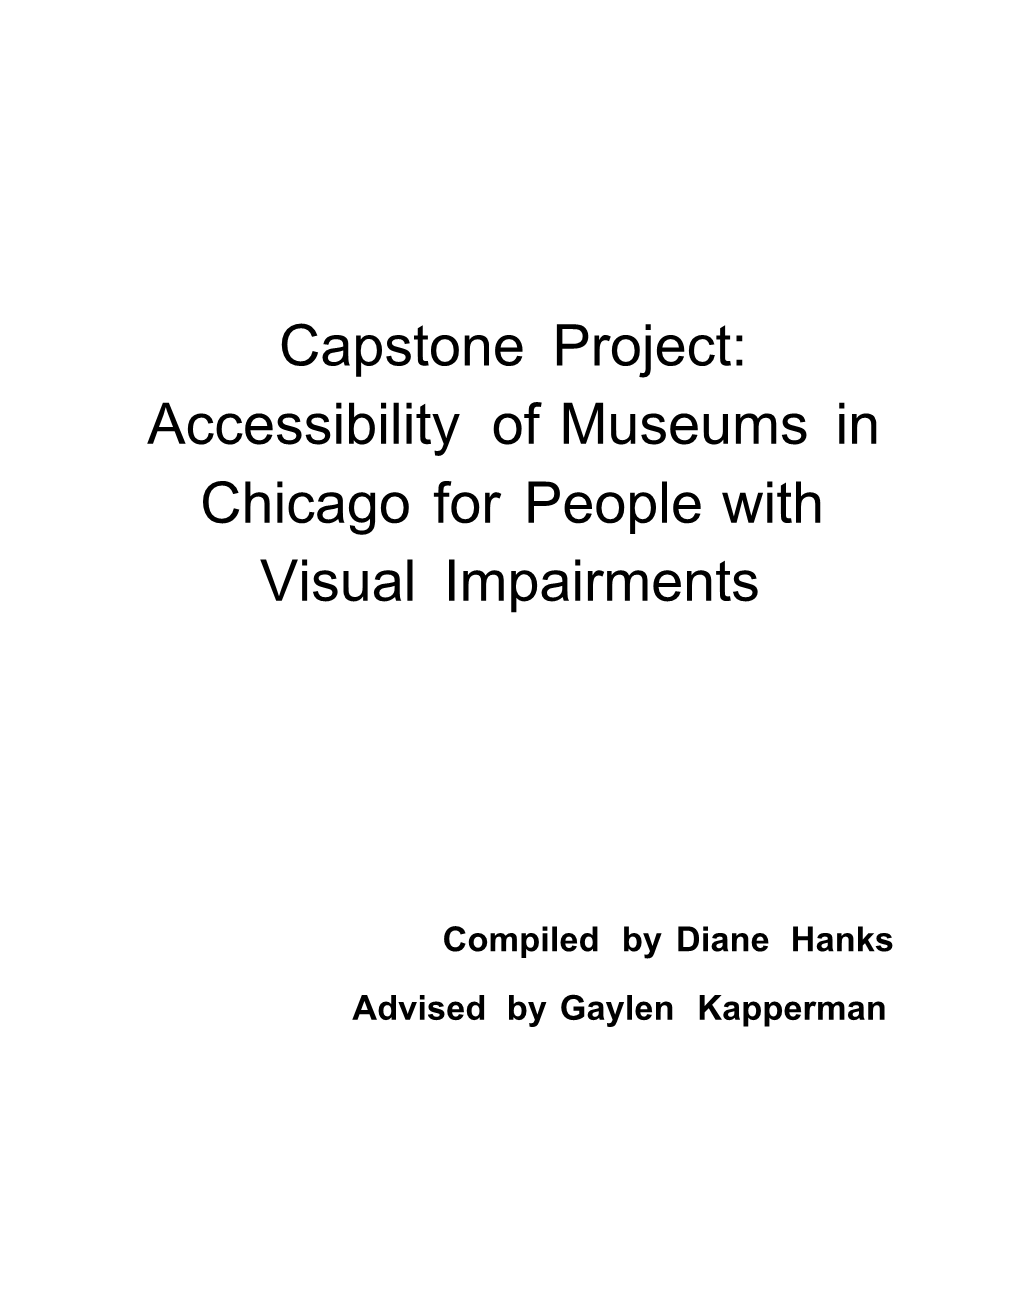 Accessibility of Museums in Chicago for People with Visual Impairments